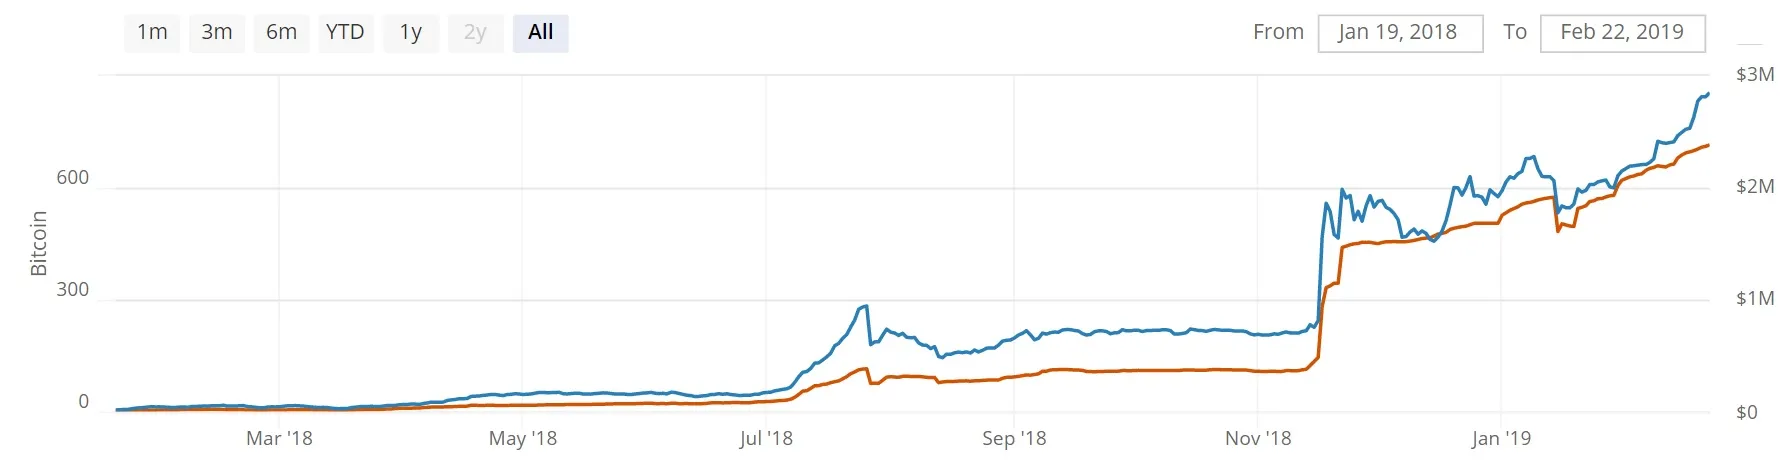 The growth of Lightning Network Transaction Capacity. (Red is BTC; Blue is USD.) Source: Bitcoinvisuals.com